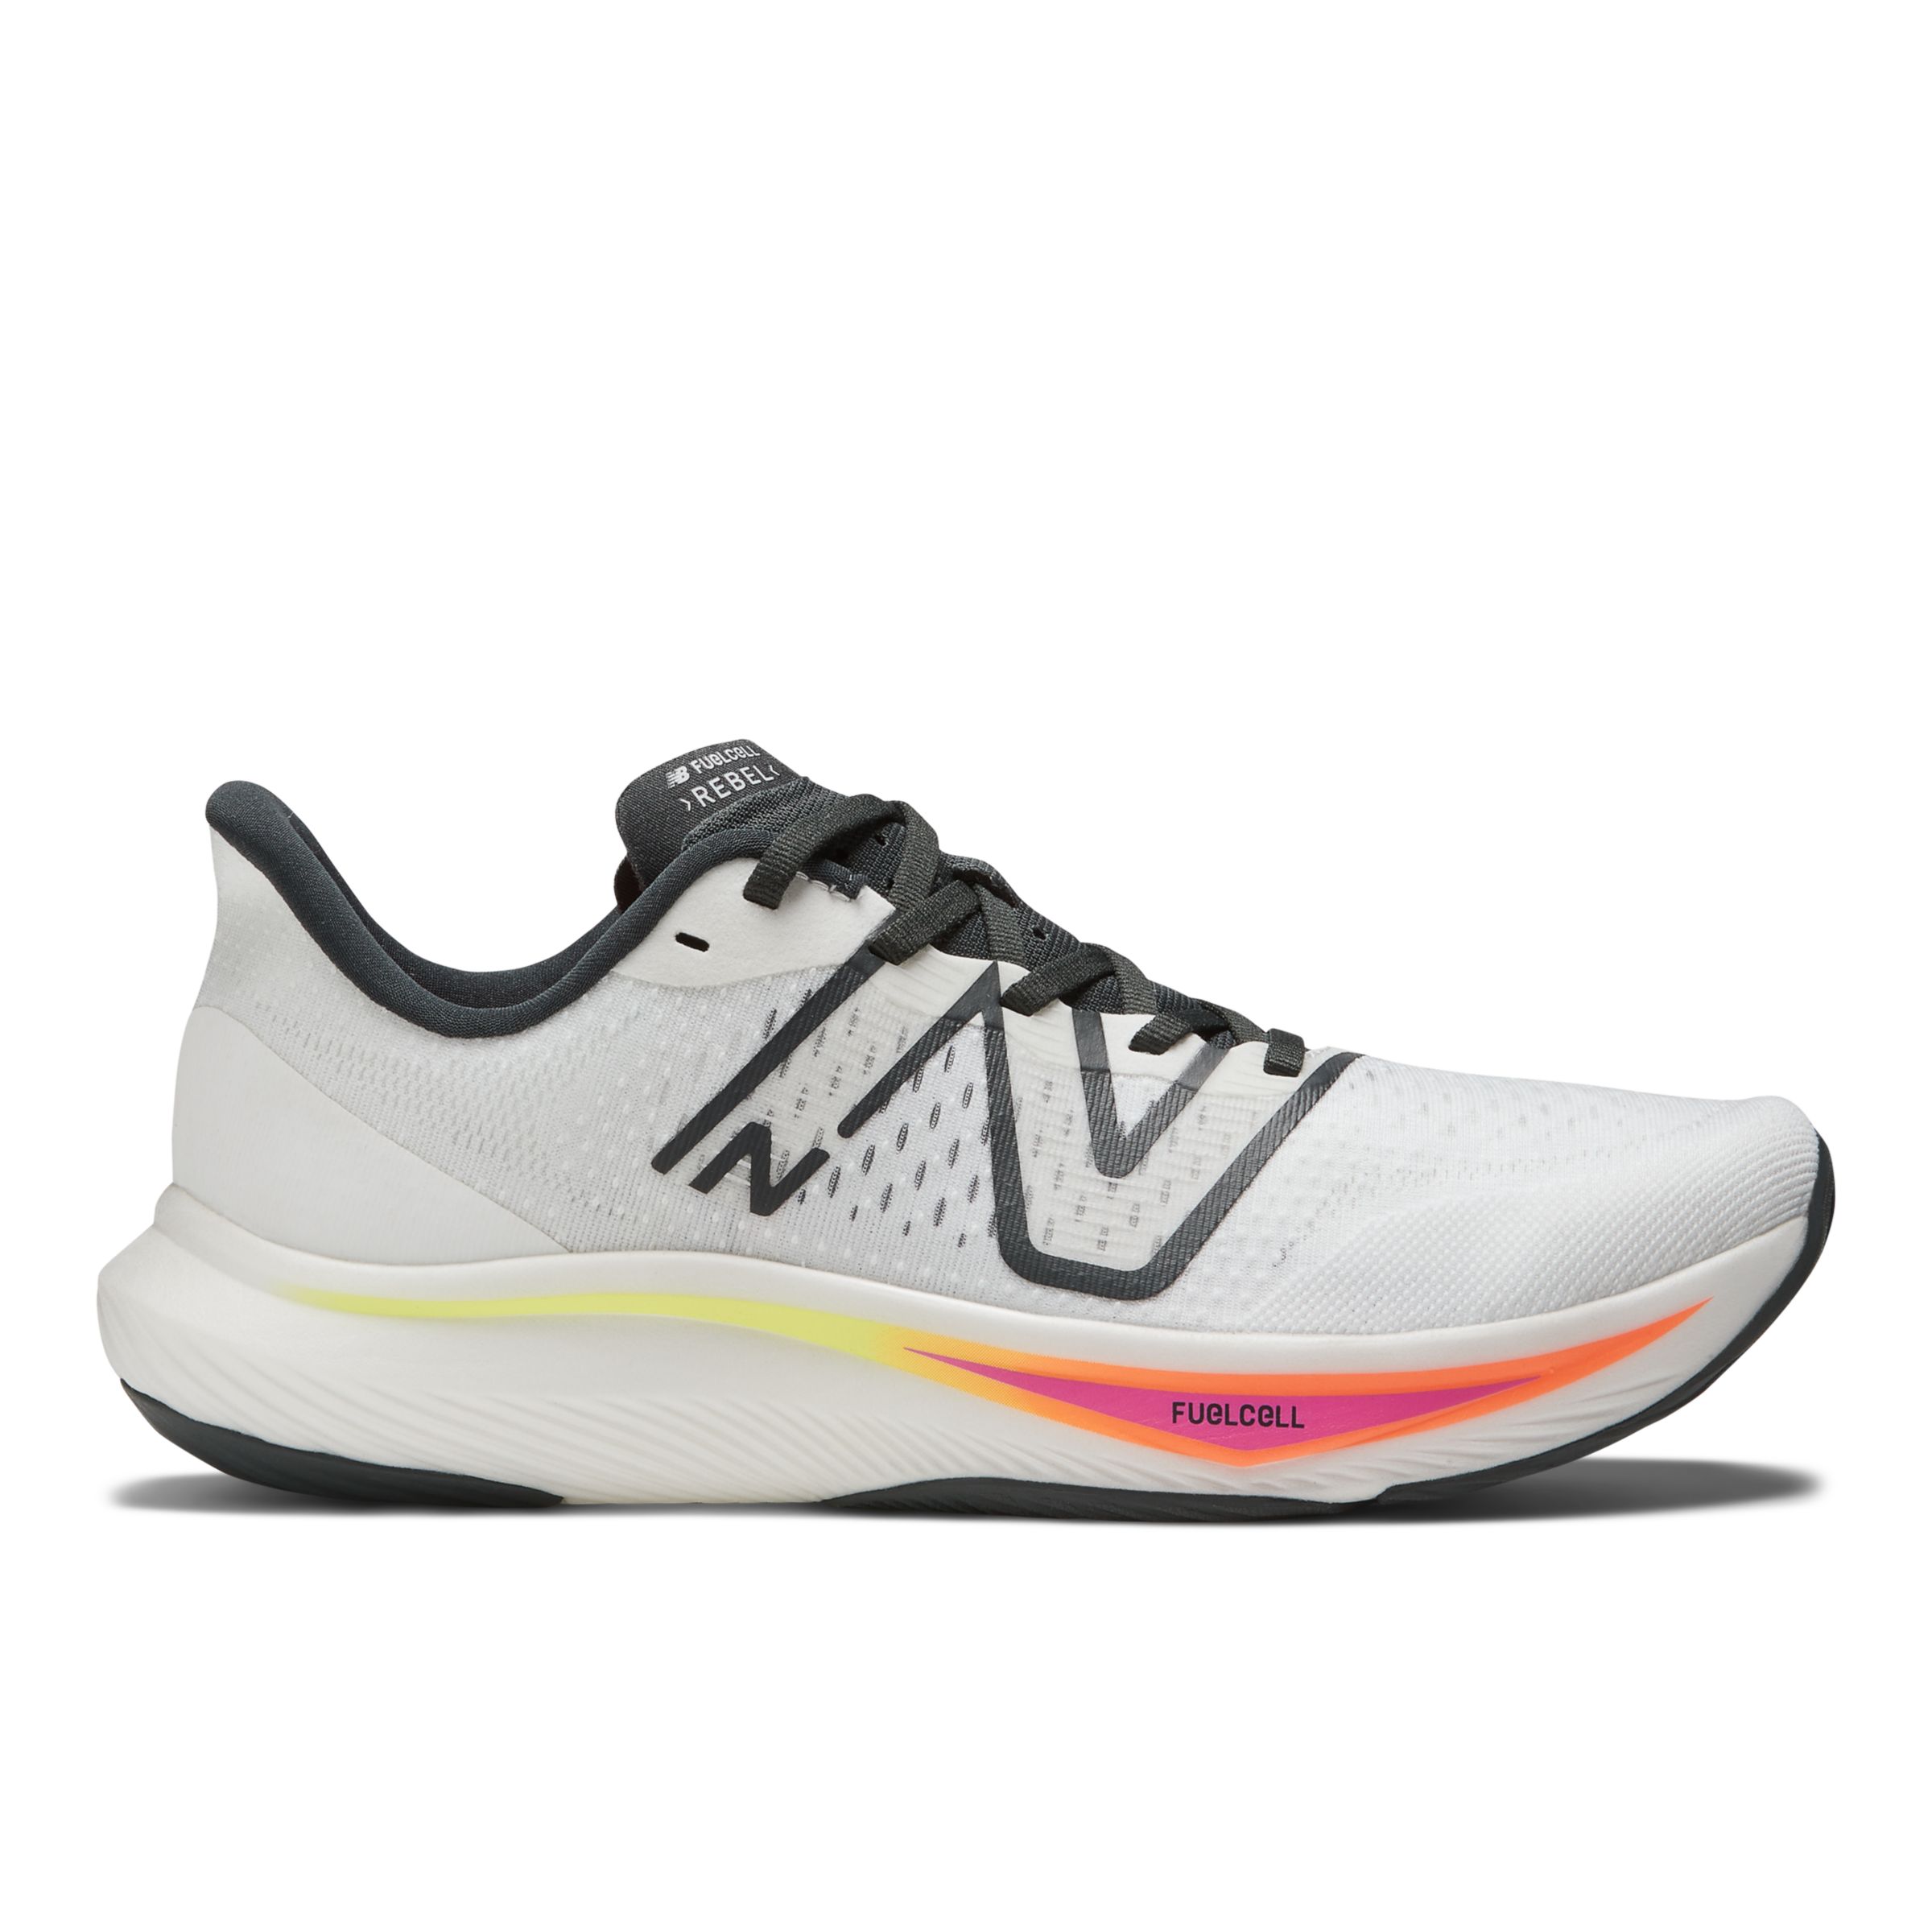 NB FuelCell Rebel v3, , swatch